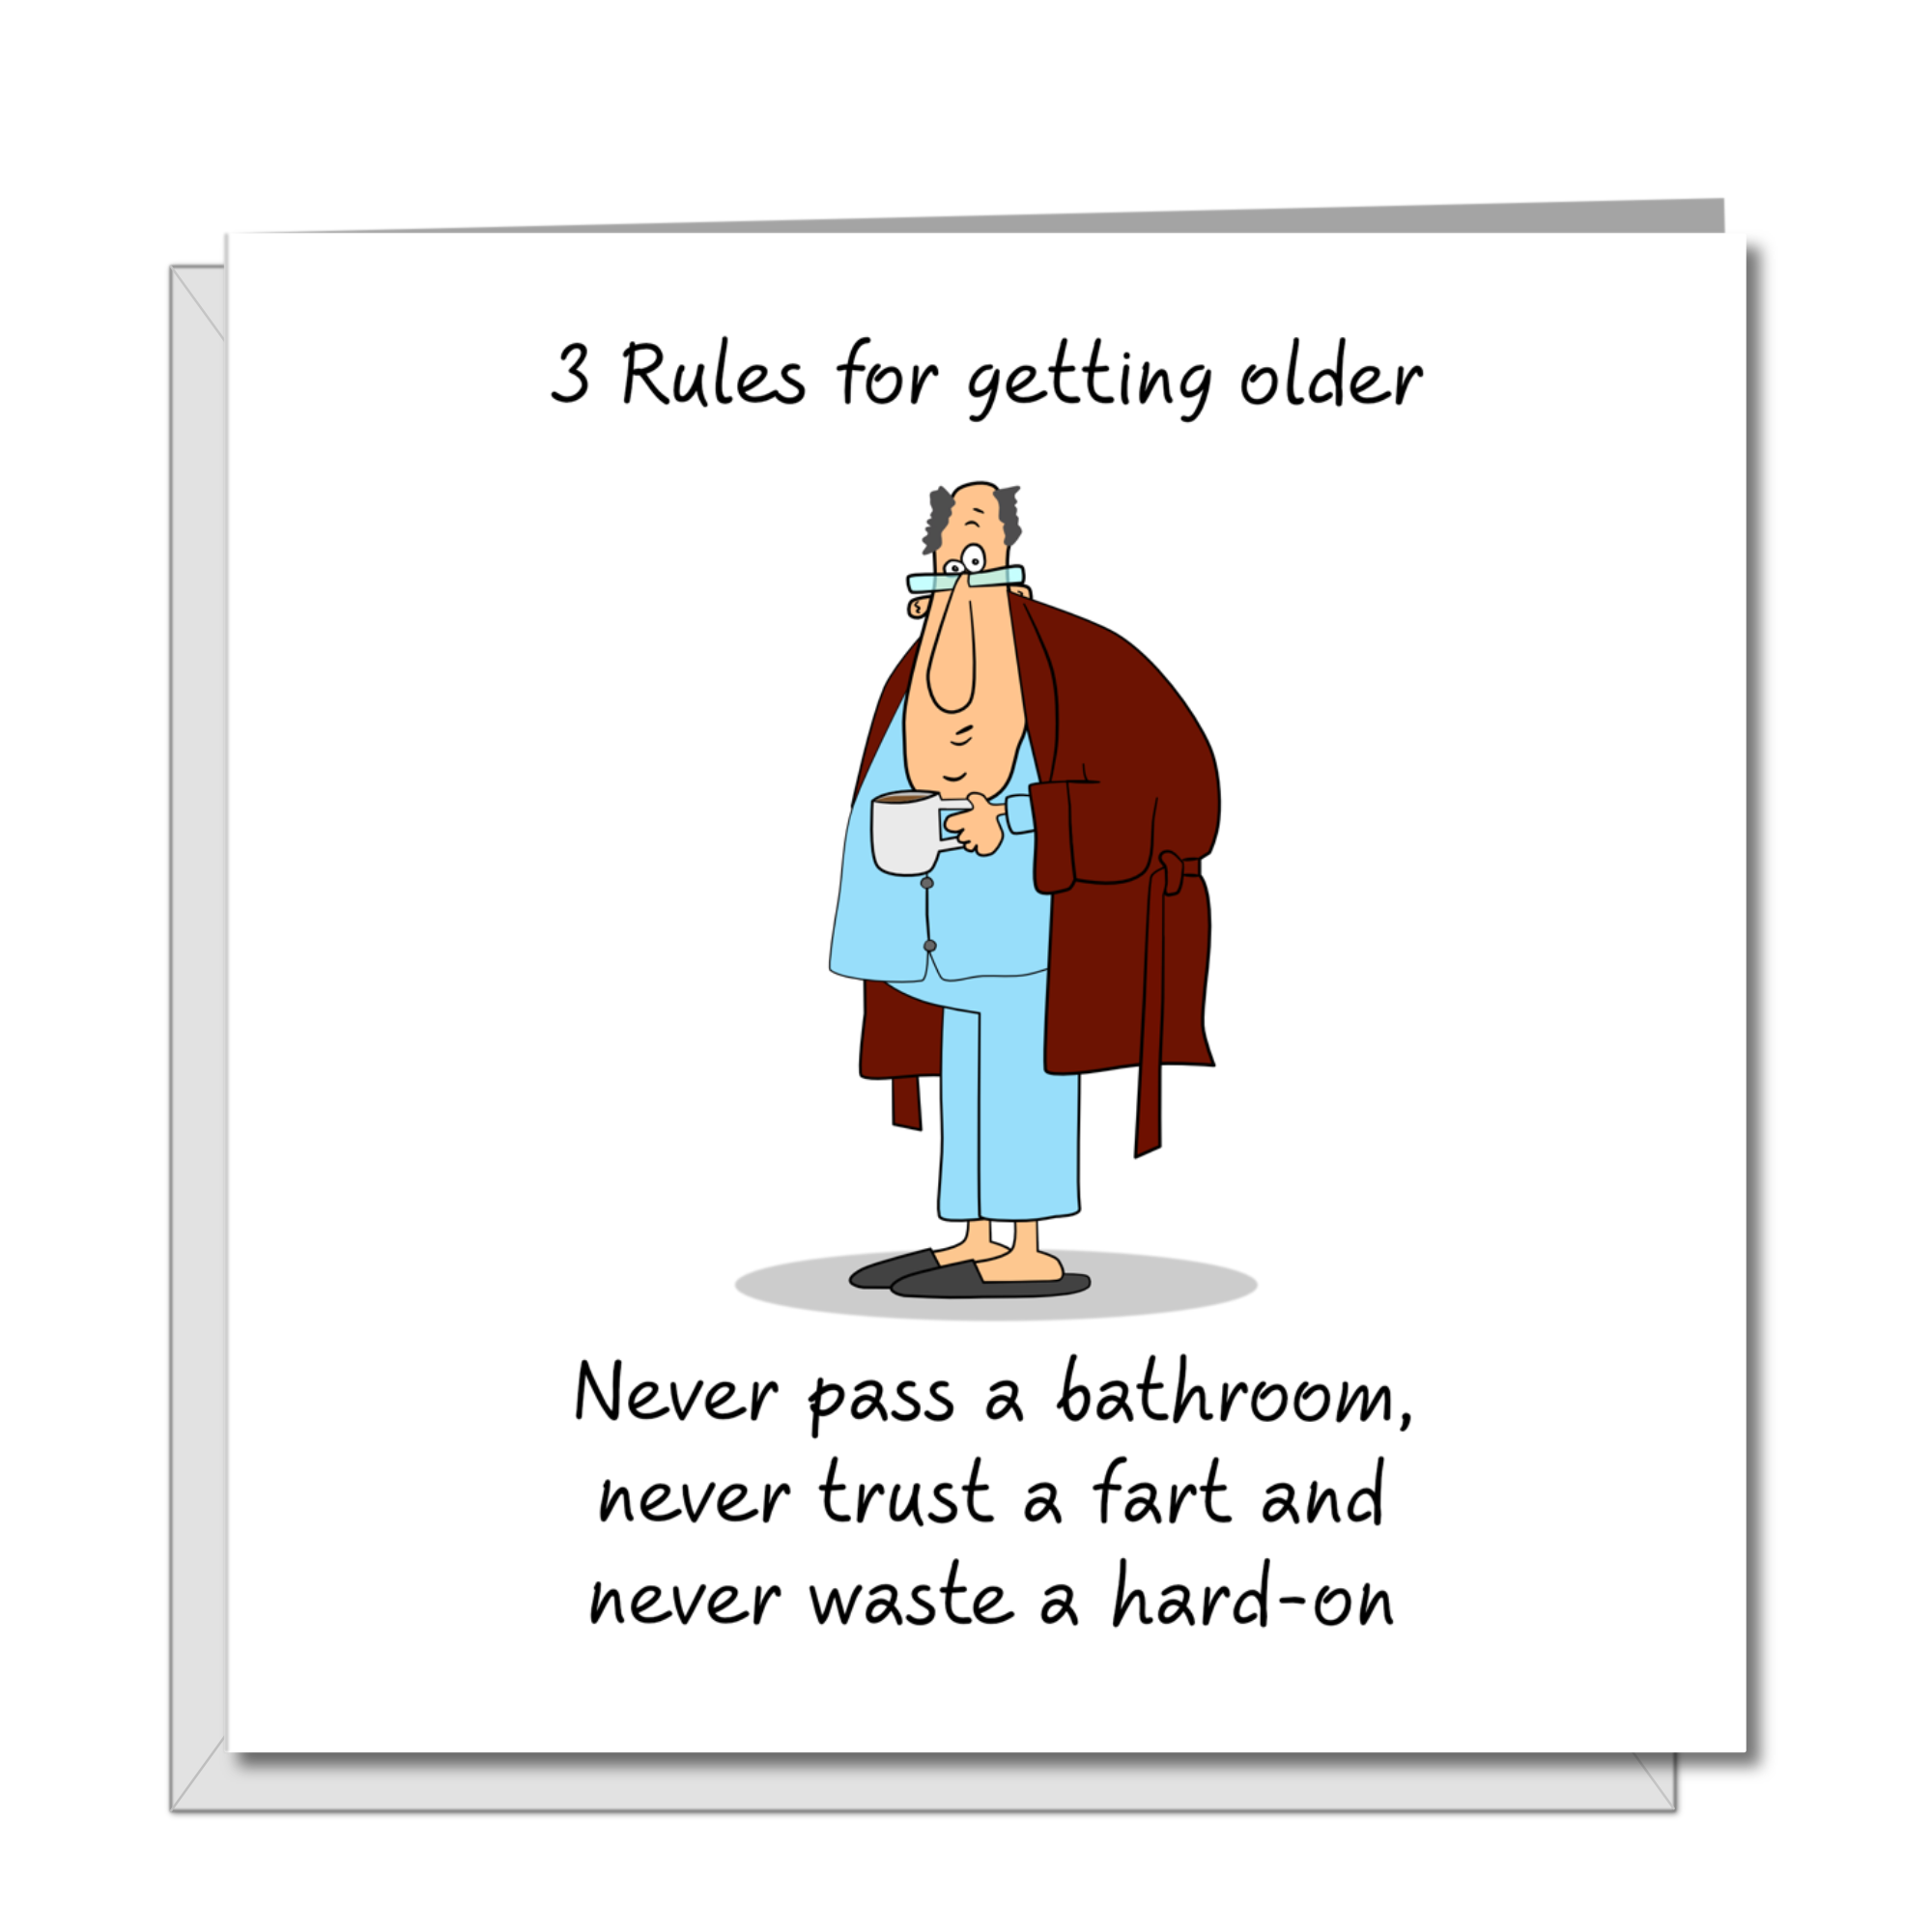 Funny 40th 50th 60th Birthday Card for Dad, boyfriend, husband or any male friend -  Funny, humorous, fun card - Rude naughty adult